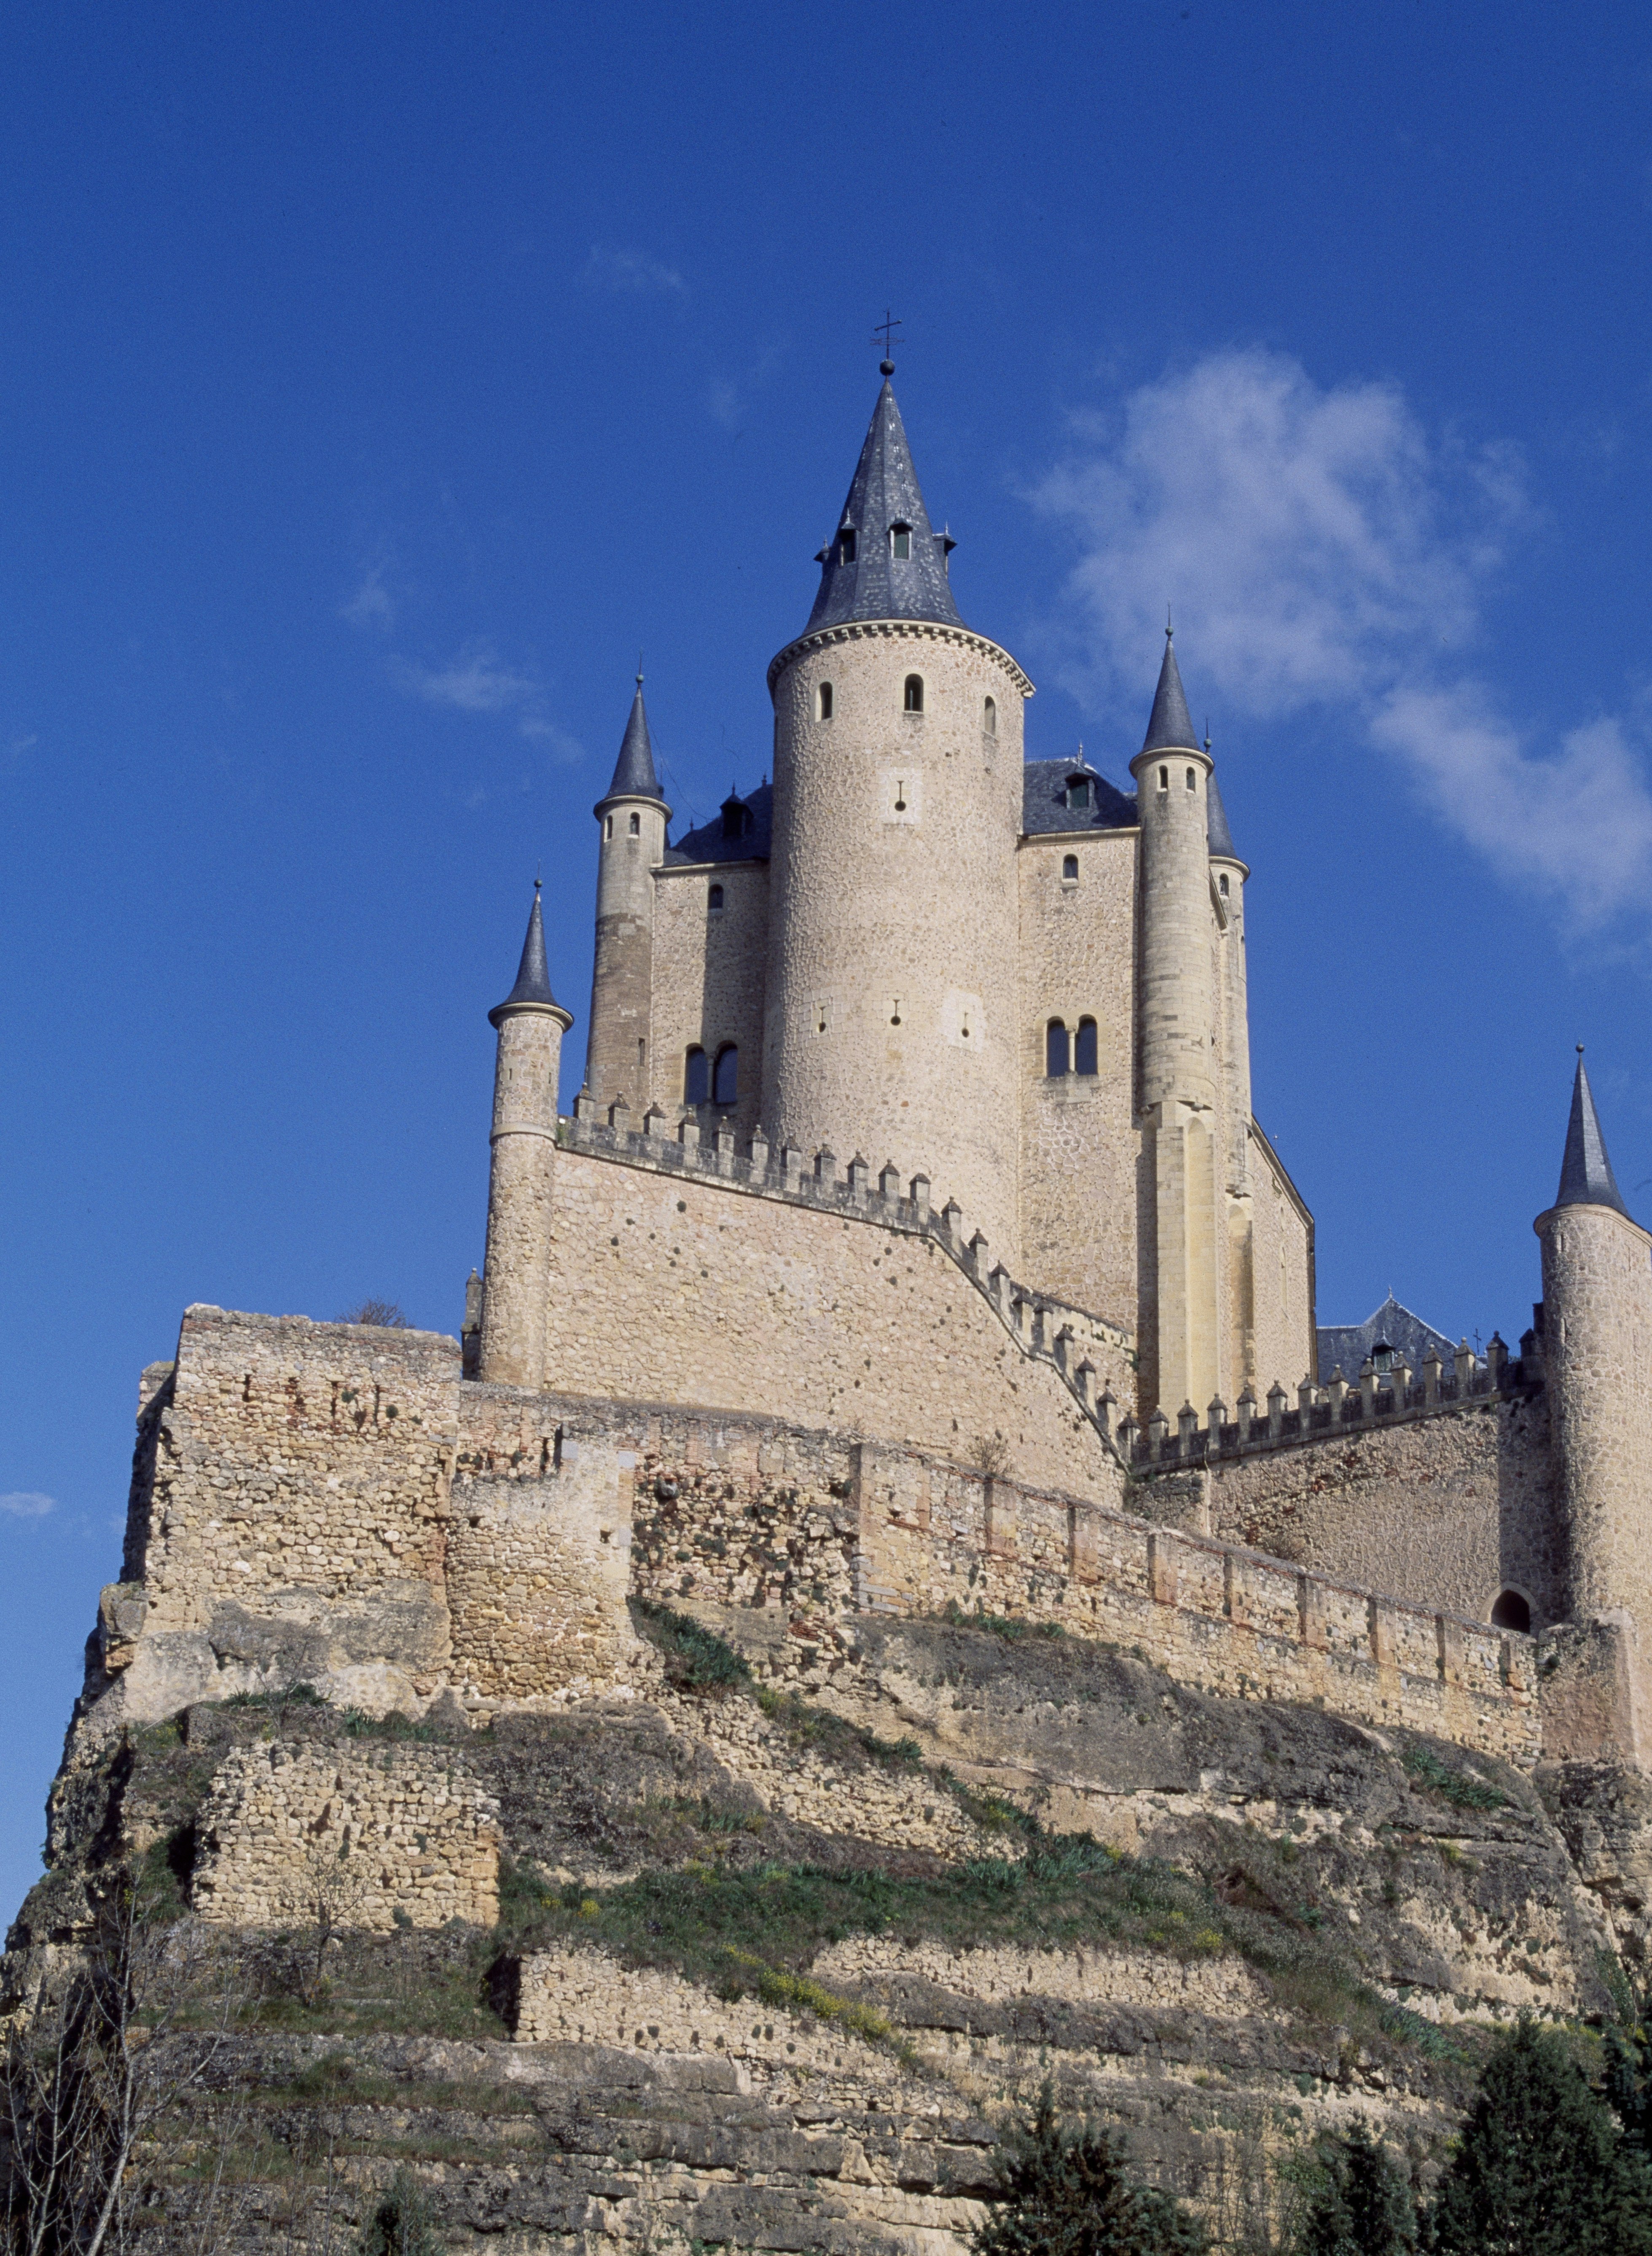 Alcazar de Segovia, a castle with dramatic, pointed spires, crenellated fortified walls, and rounded lookout towers is perched precariously on a rocky outcrop, beneath a blue sky with few clouds.